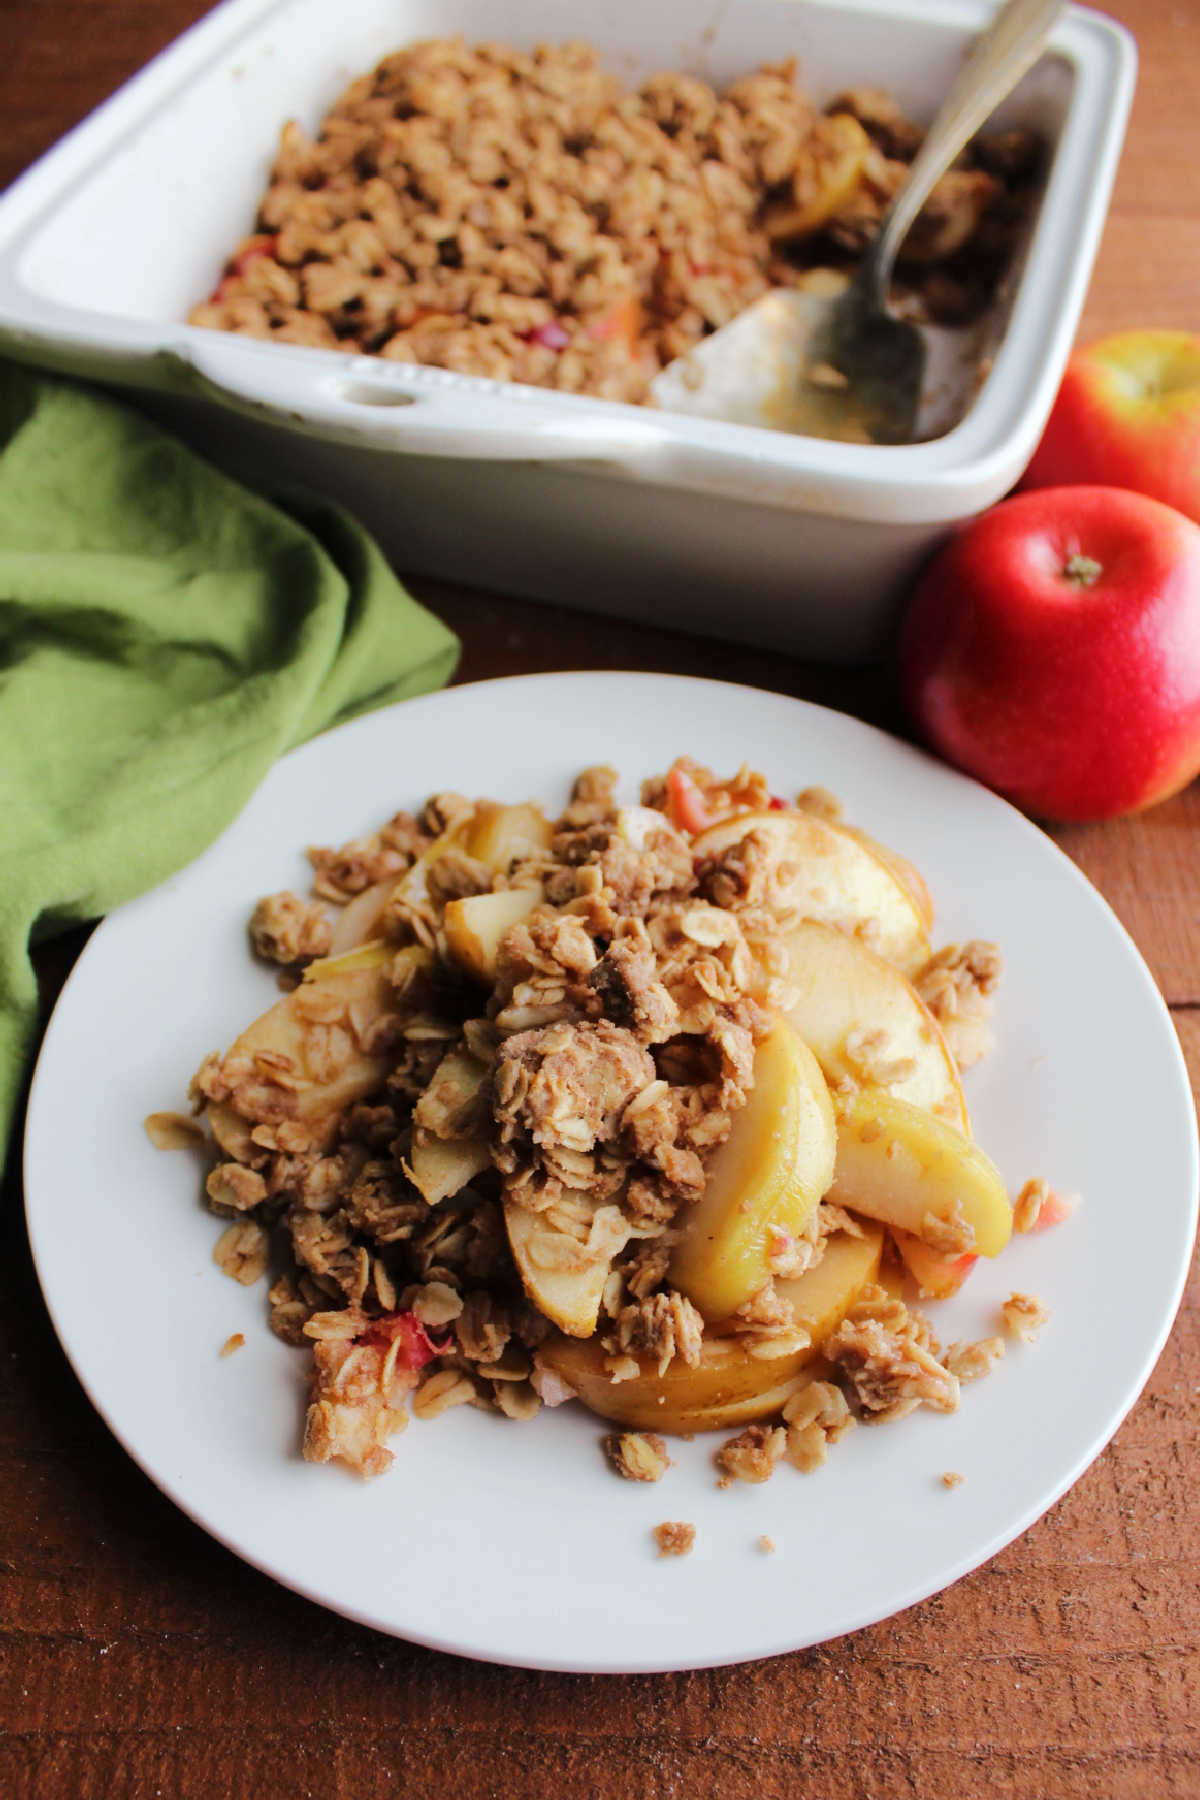 Plate of old fashioned apple crisp with sliced apples and buttery oats, ready to eat.